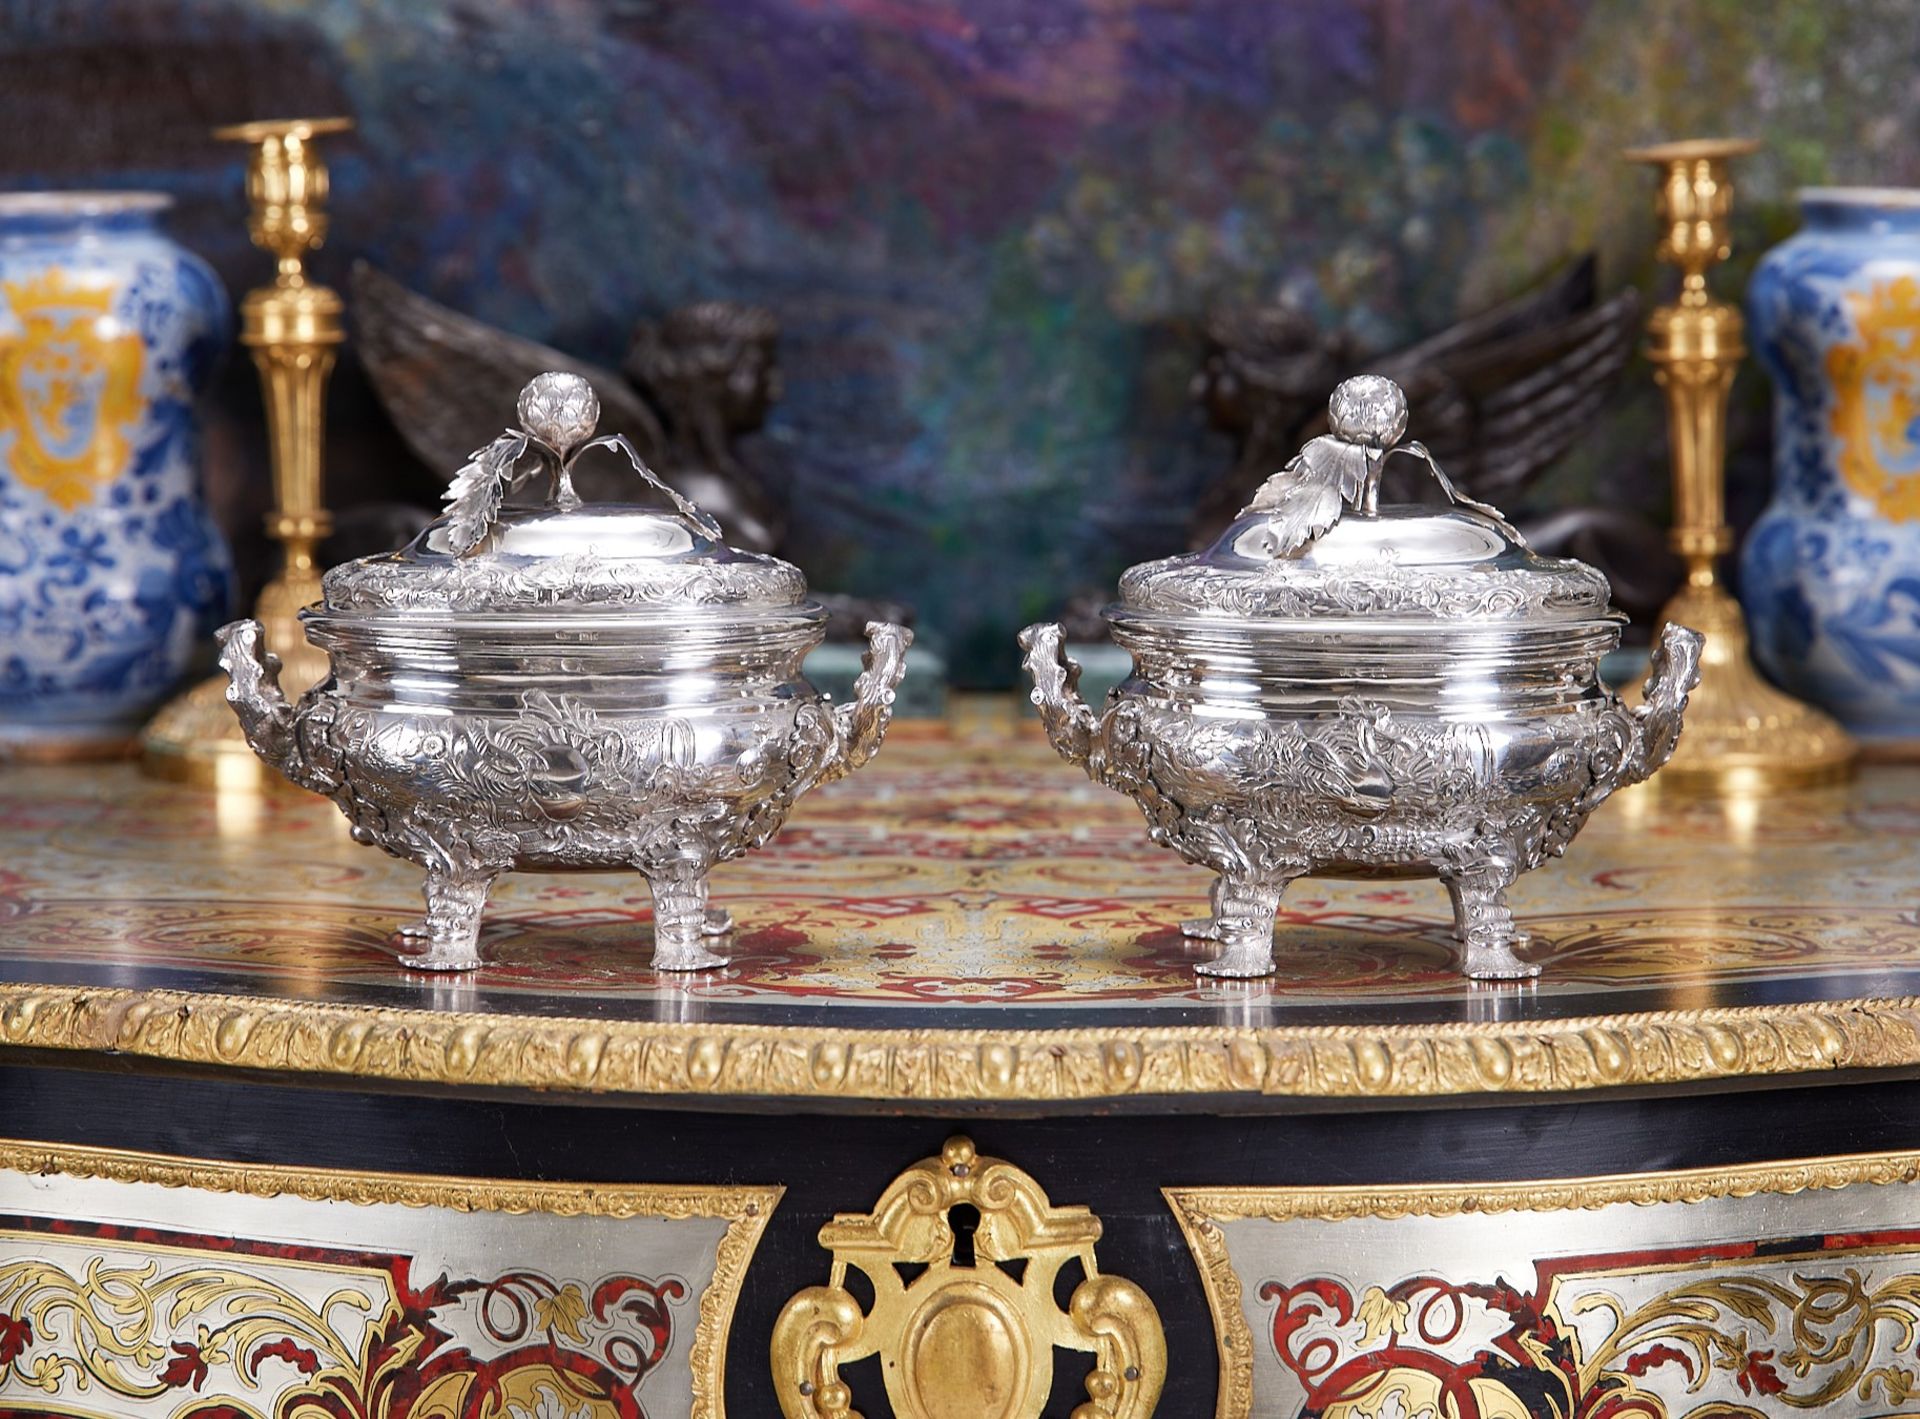 A FINE PAIR OF 18TH CENTURY STERLING SILVER SAUCE TUREENS, LONDON, 1790, WILLIAM PITTS